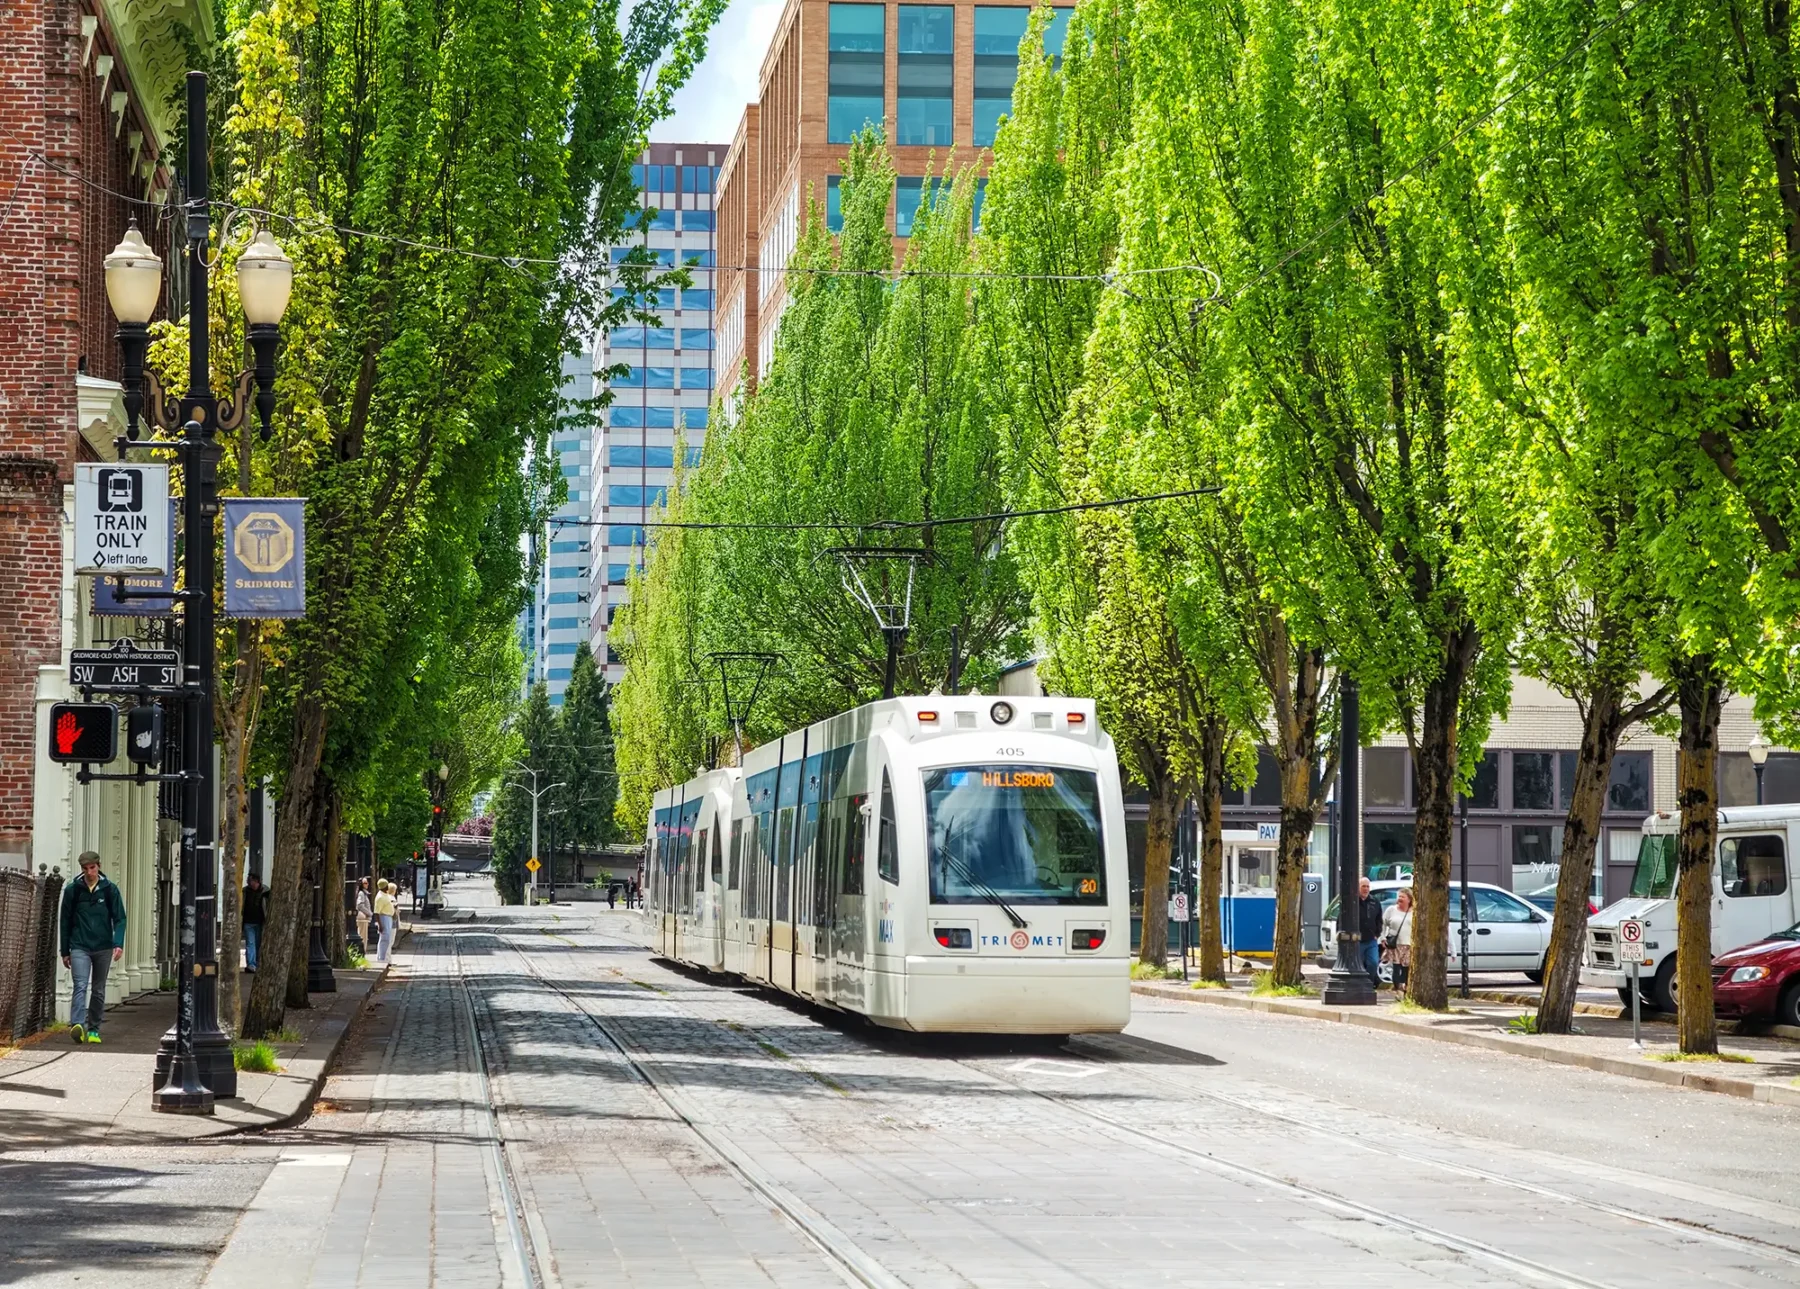 City street with trees on either side, with a trolley car in the street